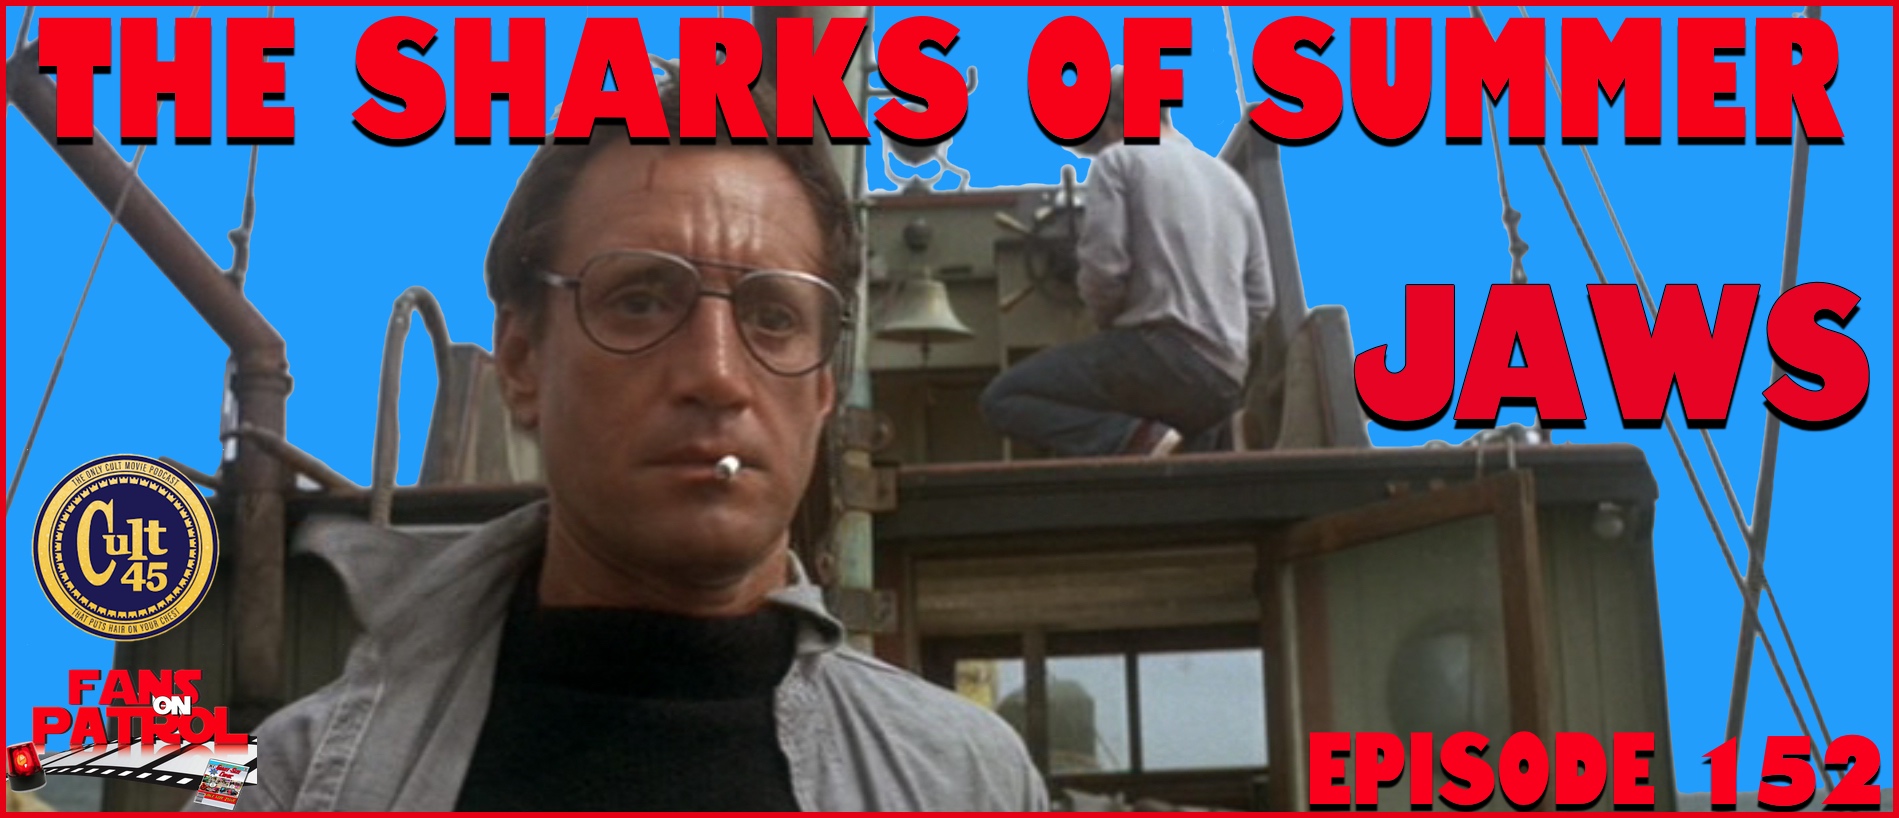 The Sharks of Summer, Jaws Episode 152